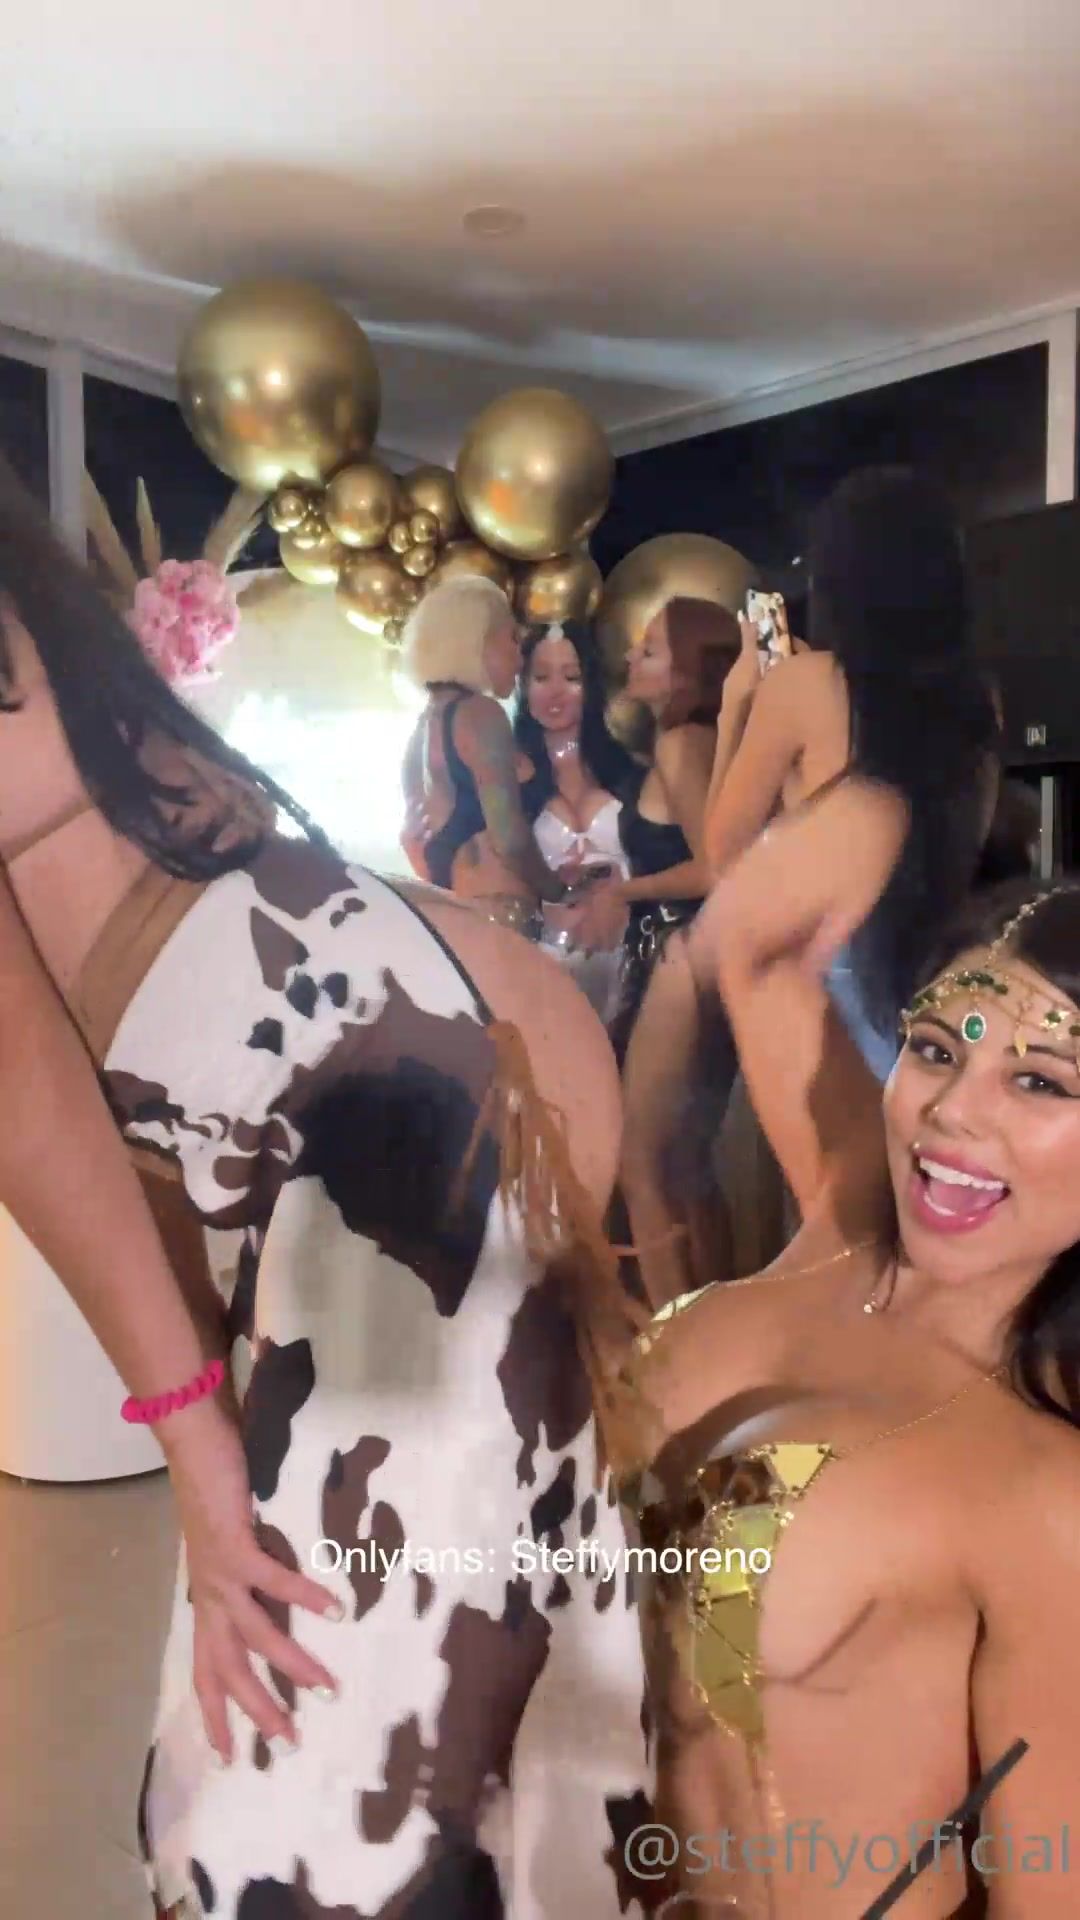 Steffy moreno onlyfans party